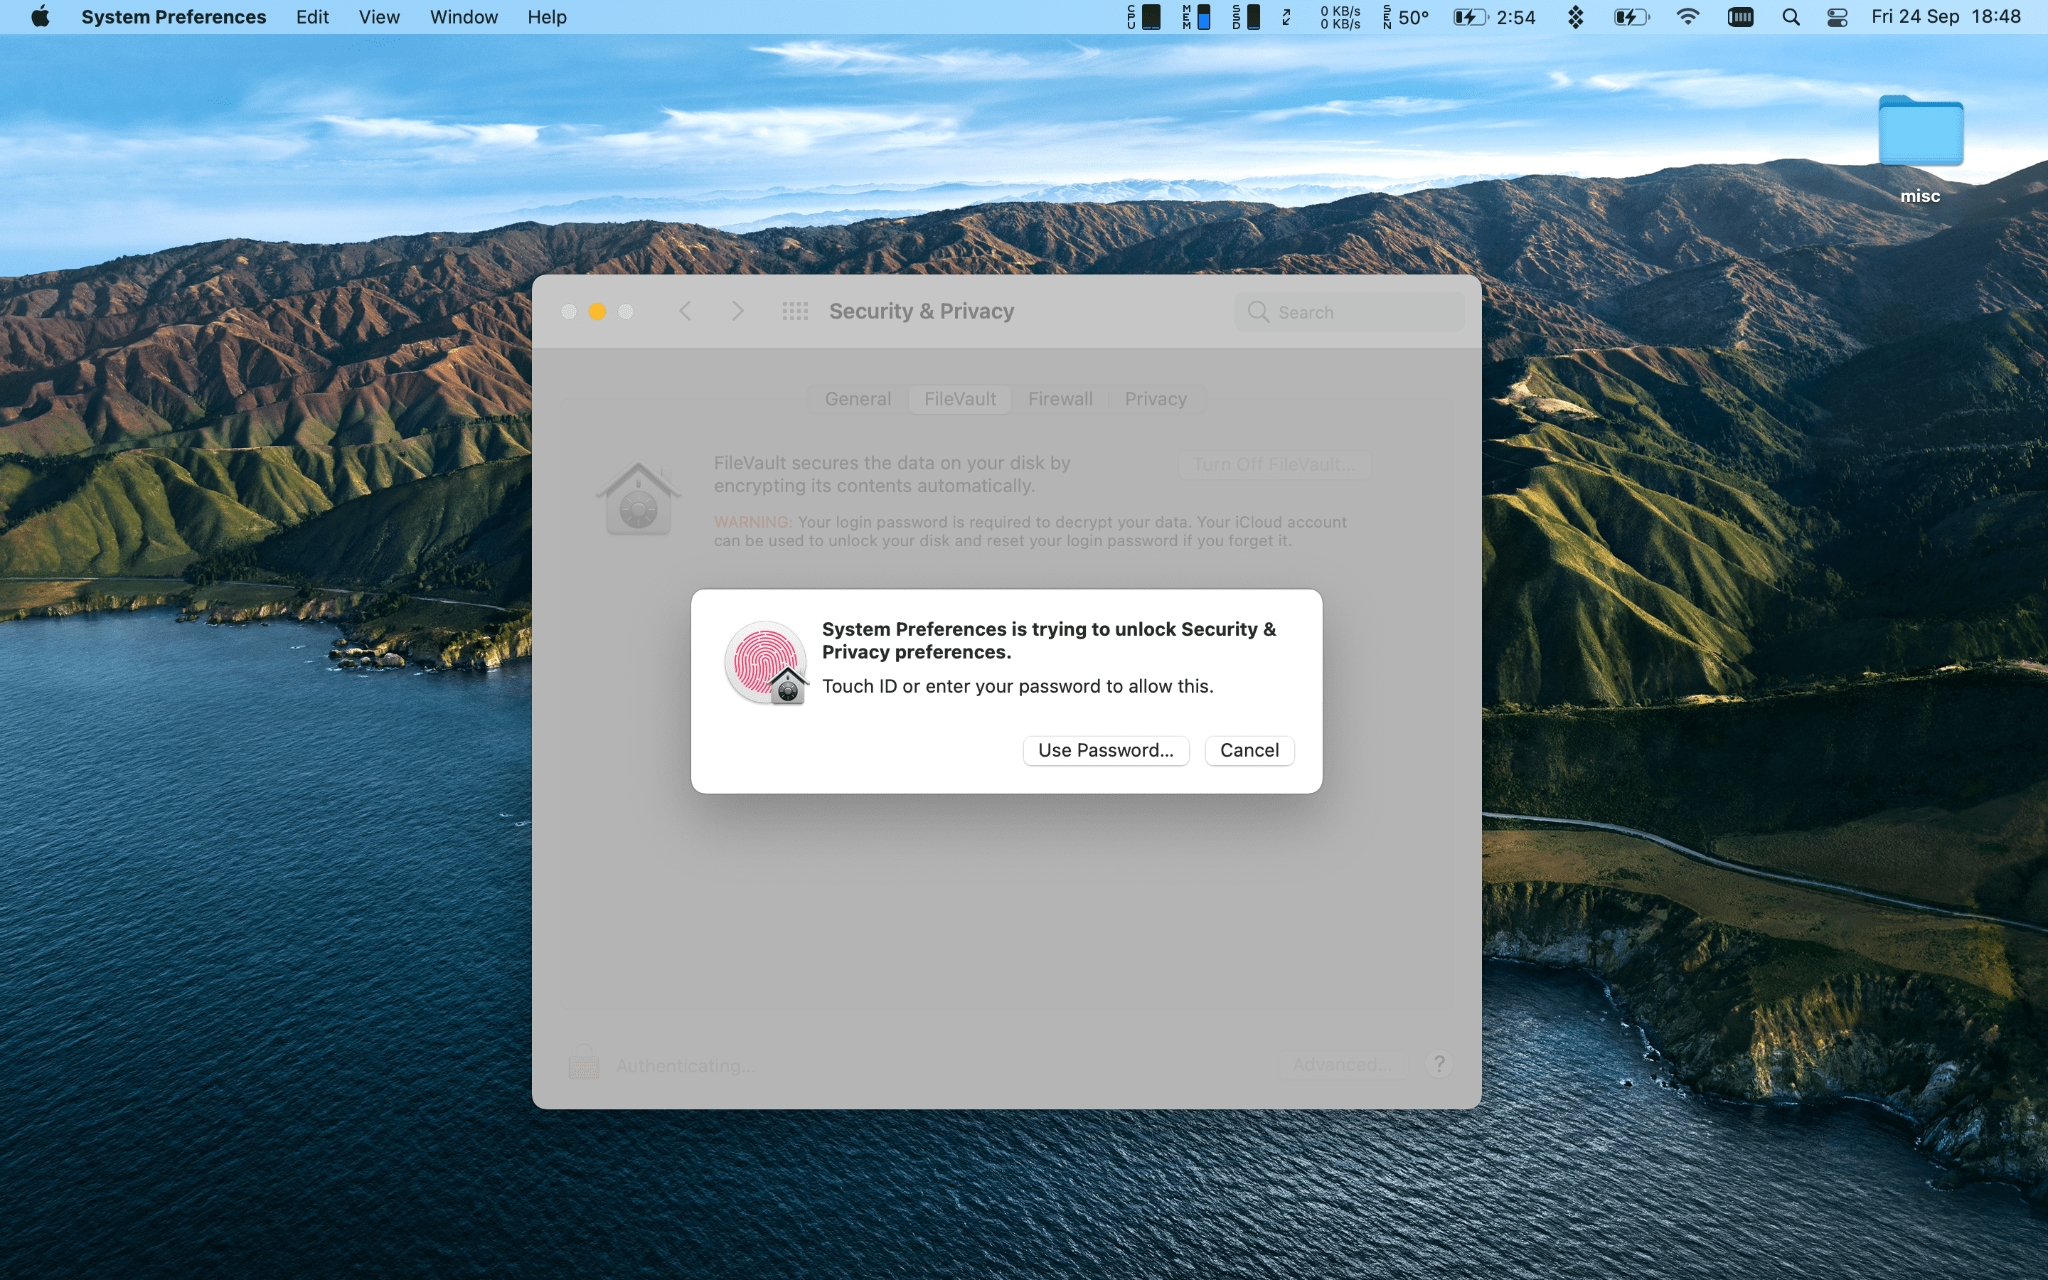 enable FileVault disk encryption